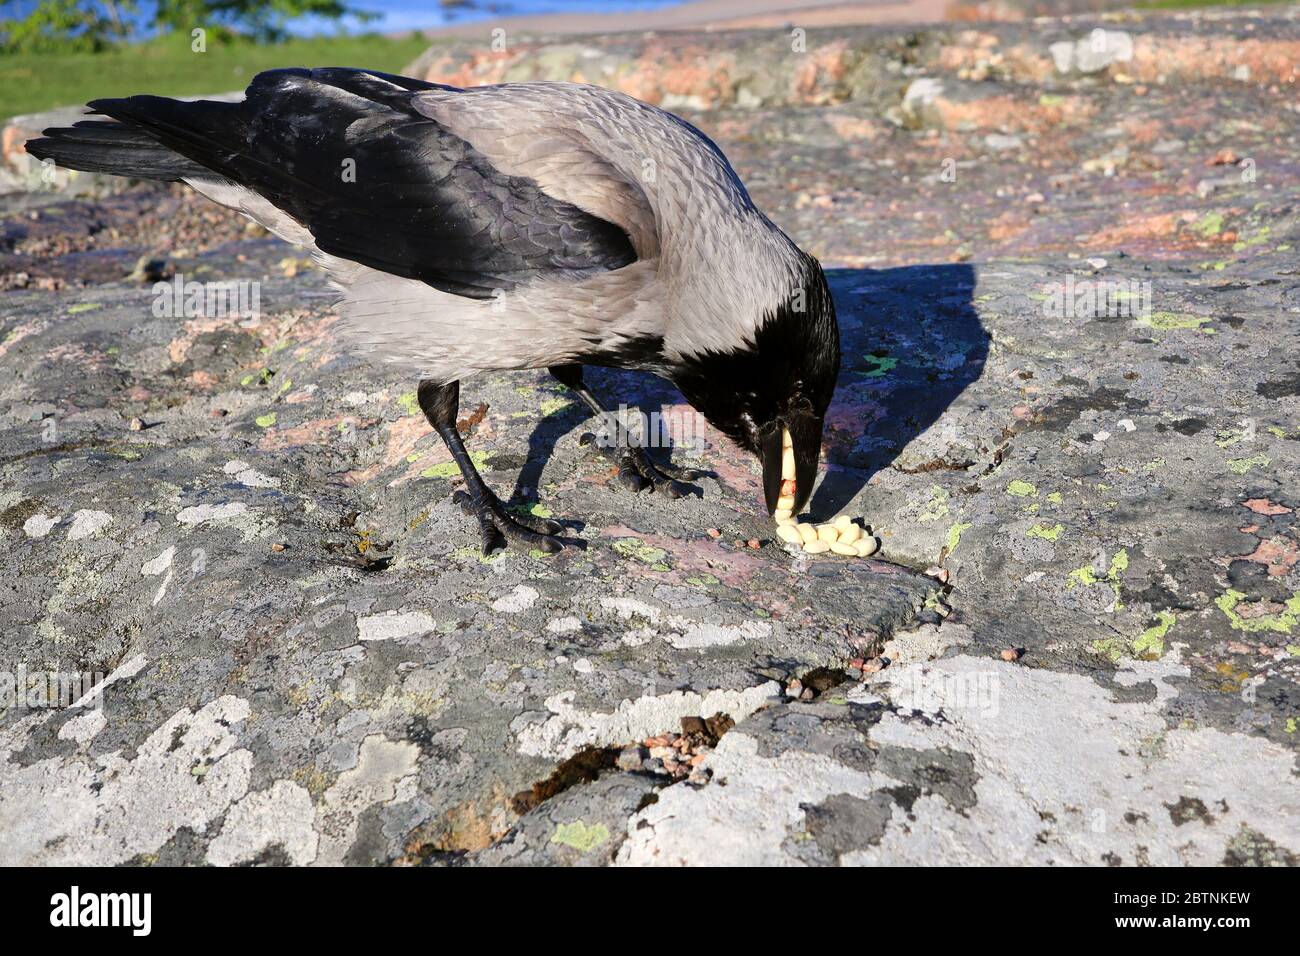 Hooded Crow, Corvus cornix, loves eating peanuts. Crows are intelligent birds known also to cache their food for short term or long term. Stock Photo